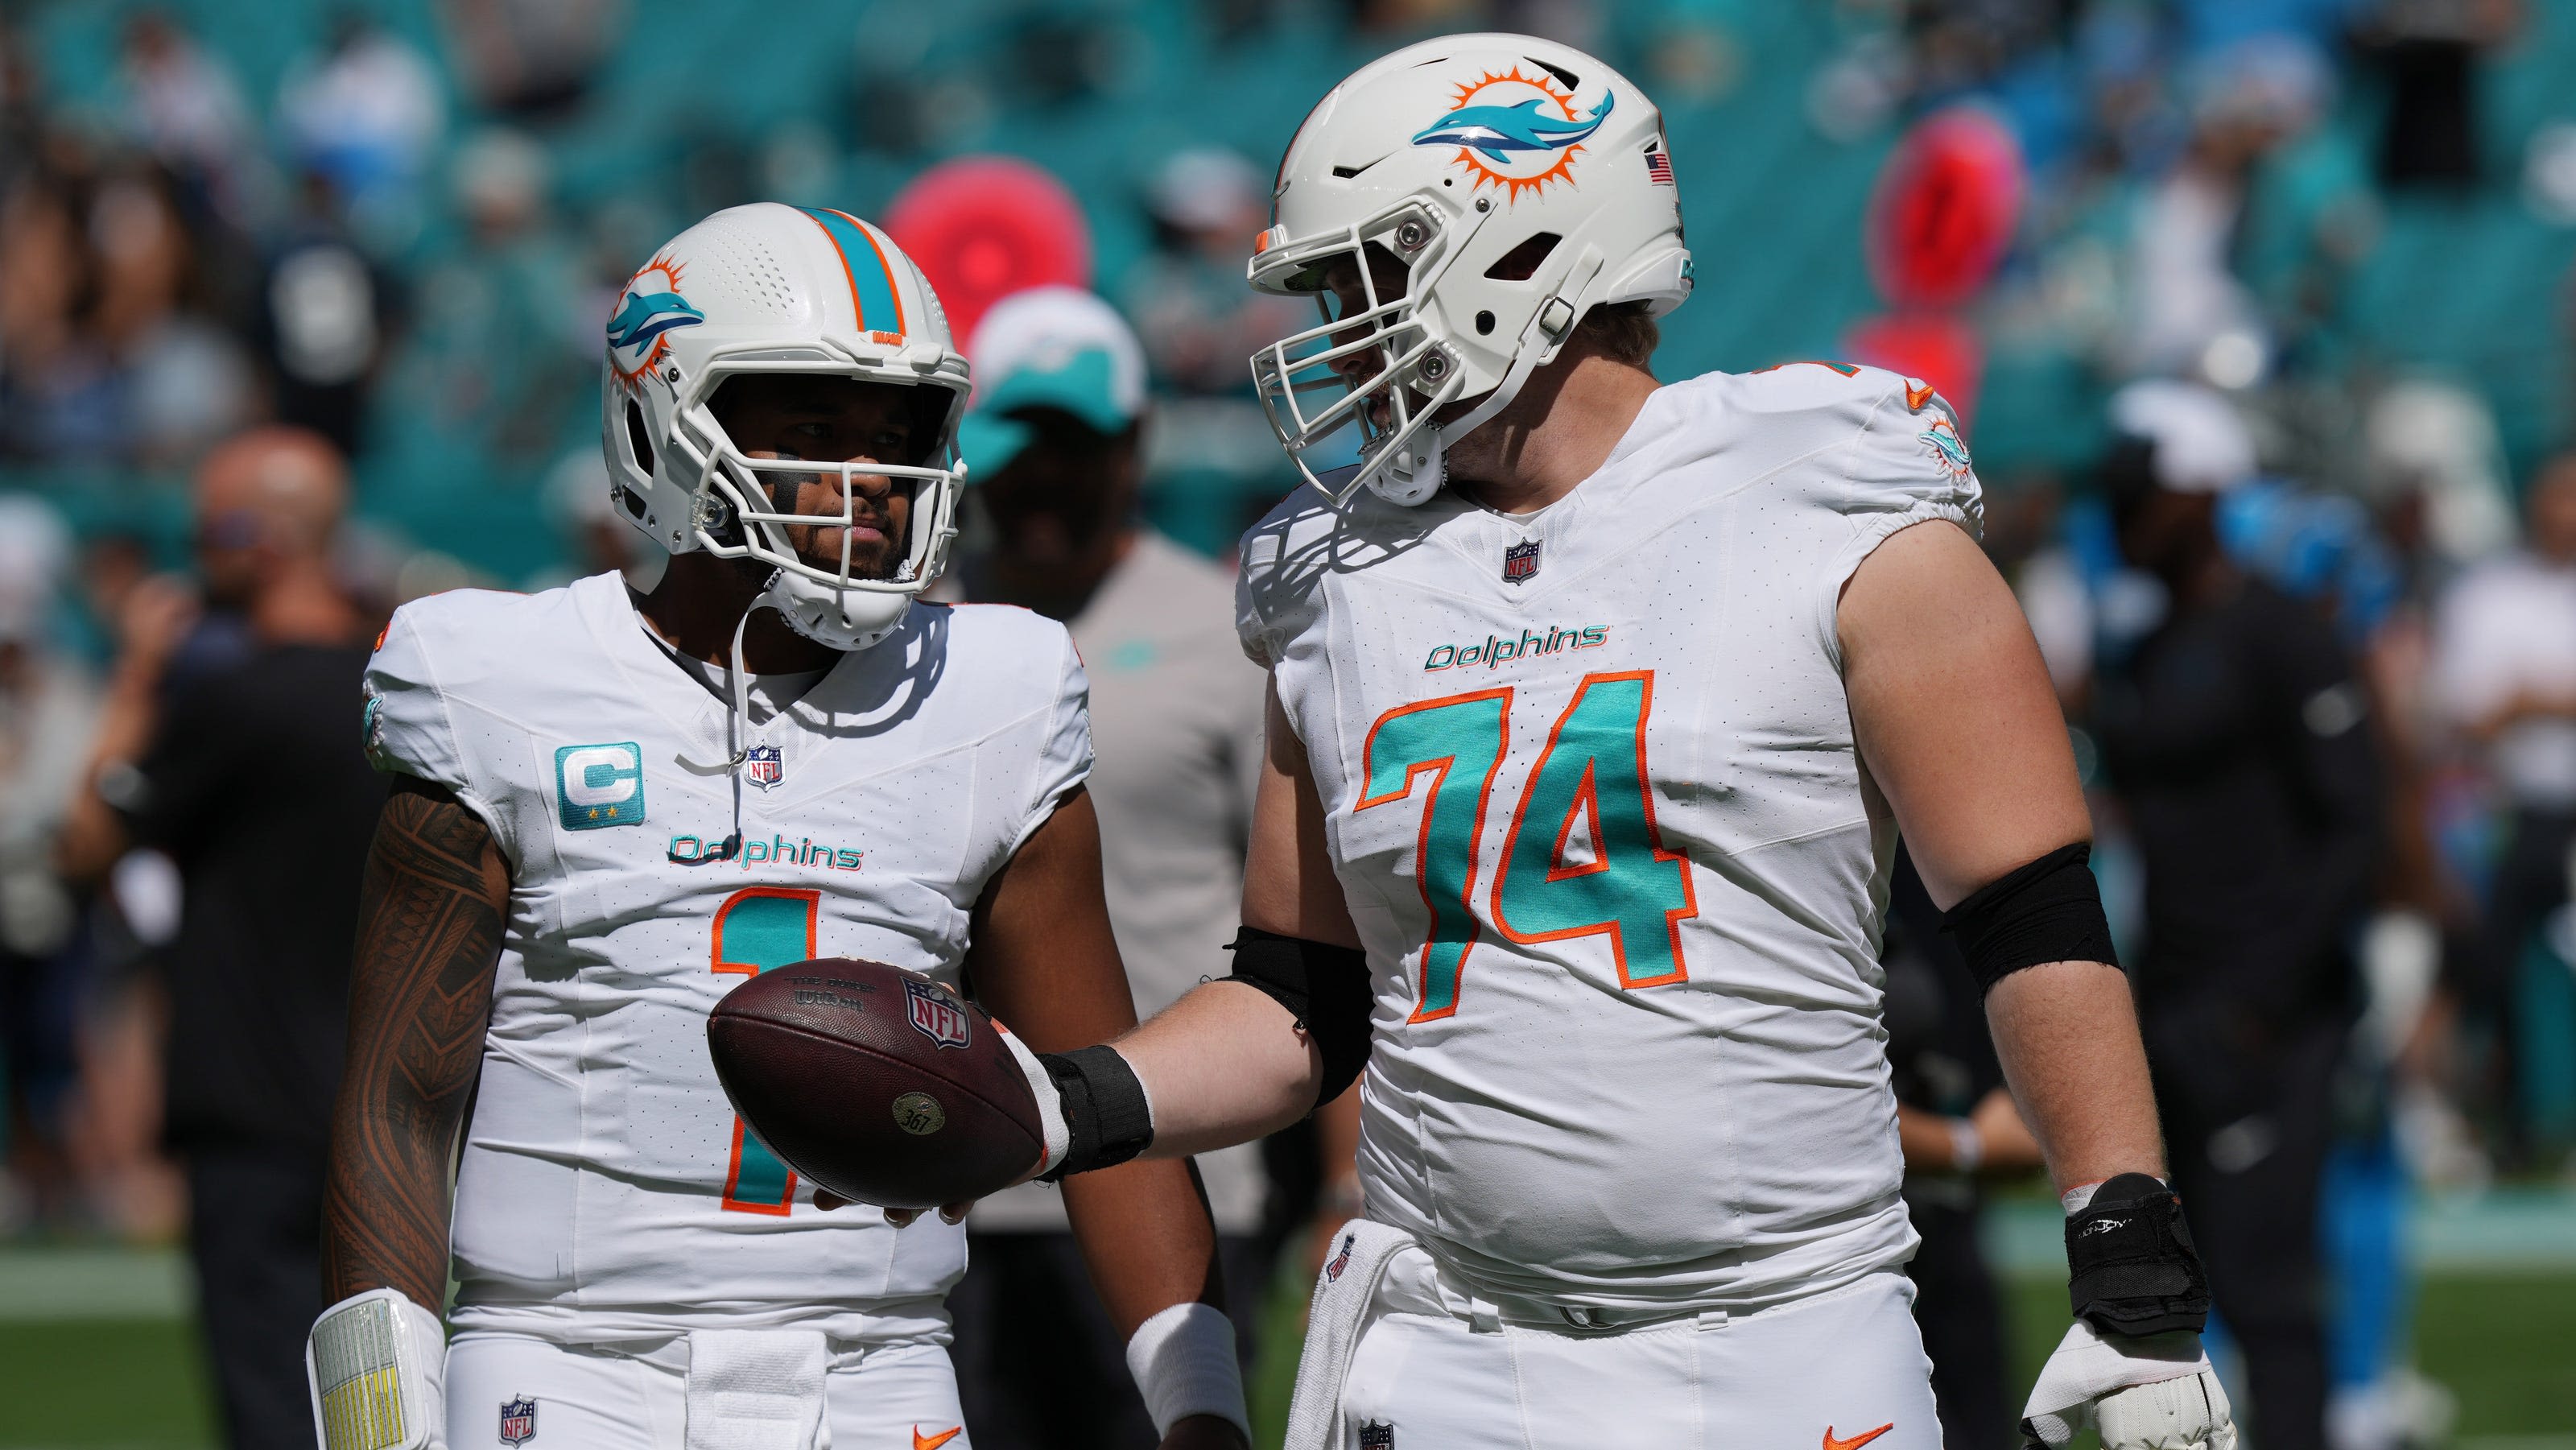 Miami Dolphins depth chart revealed: See the initial roster depth